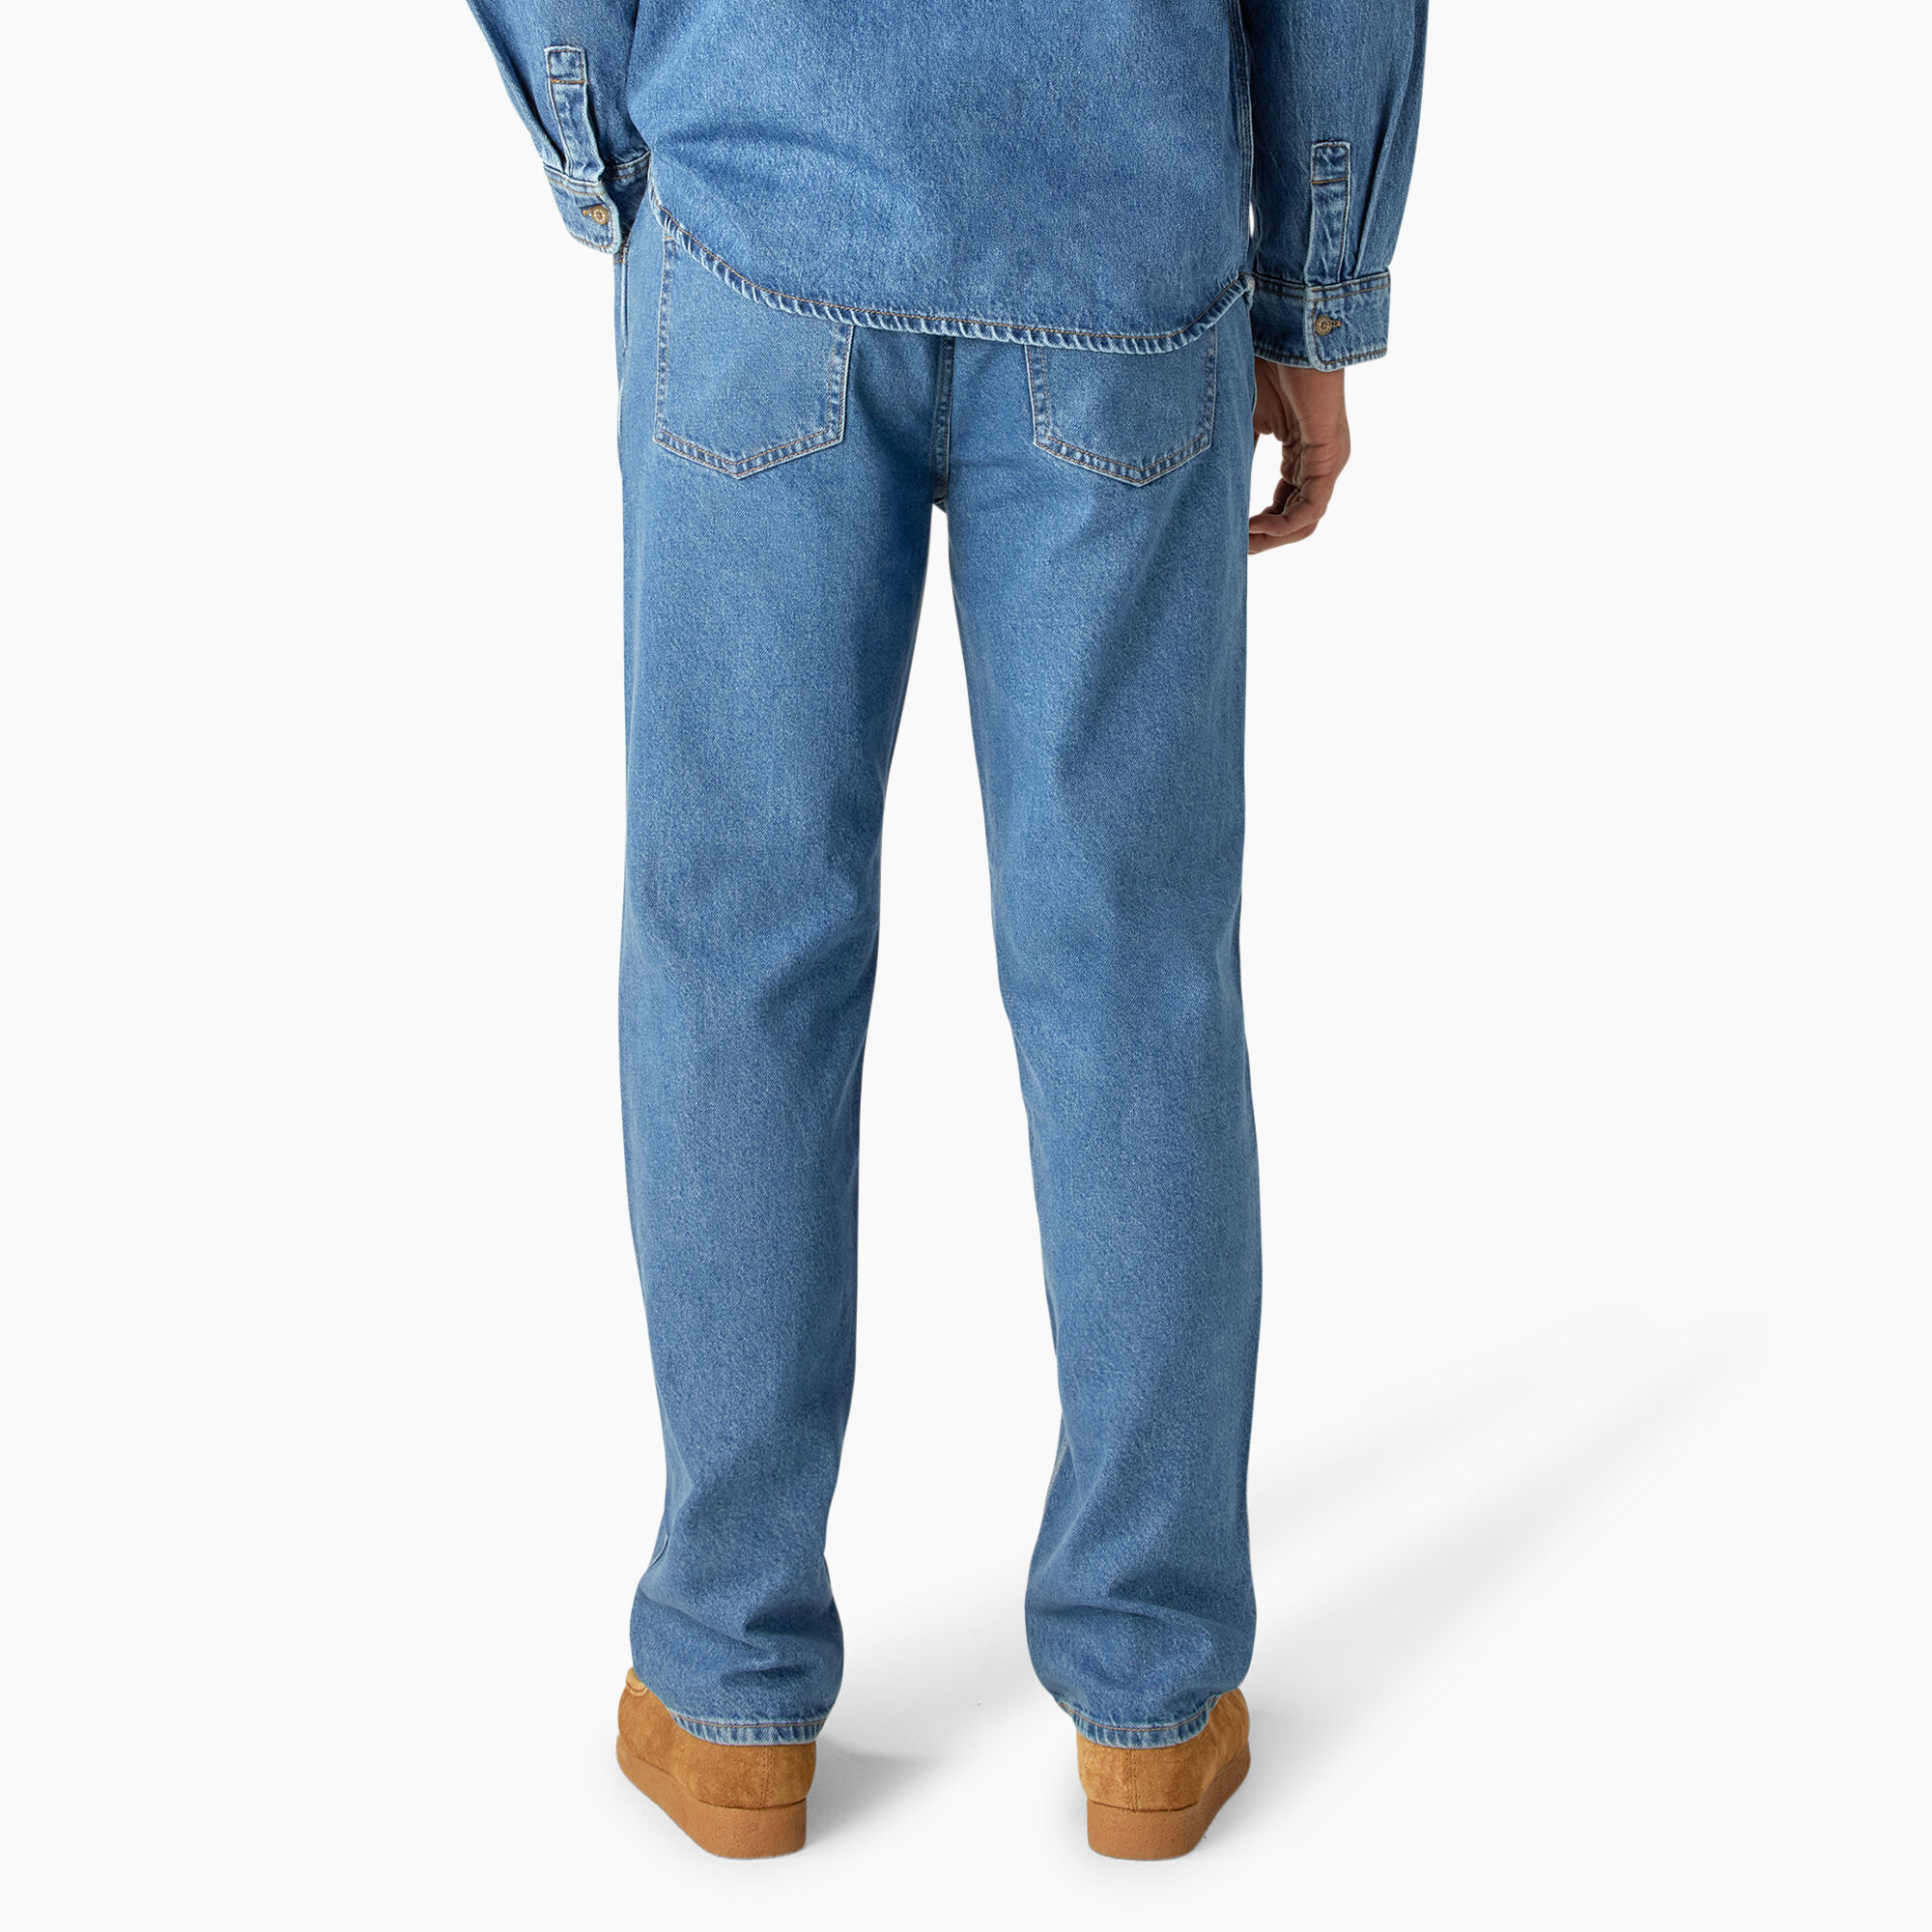 Houston Relaxed Fit Jeans